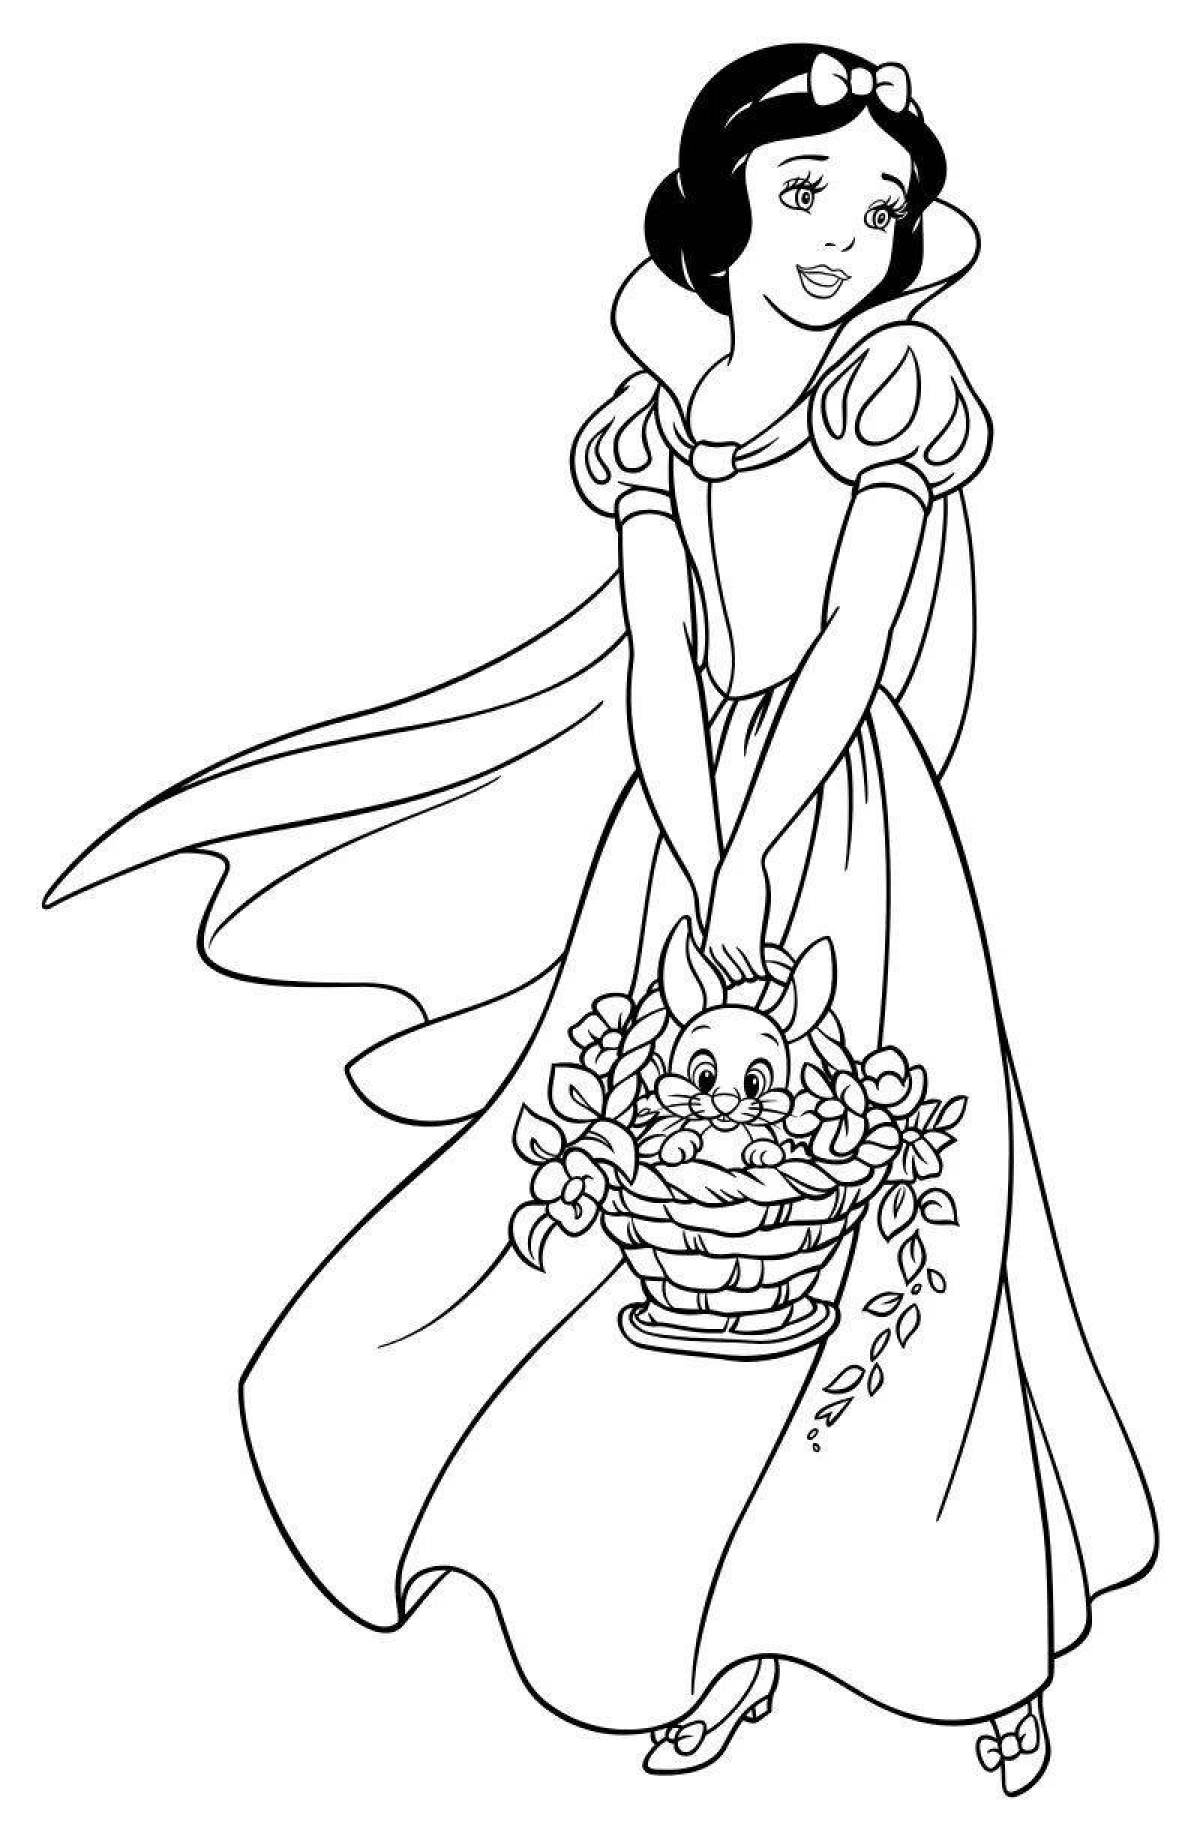 Whimsical snow white coloring for girls